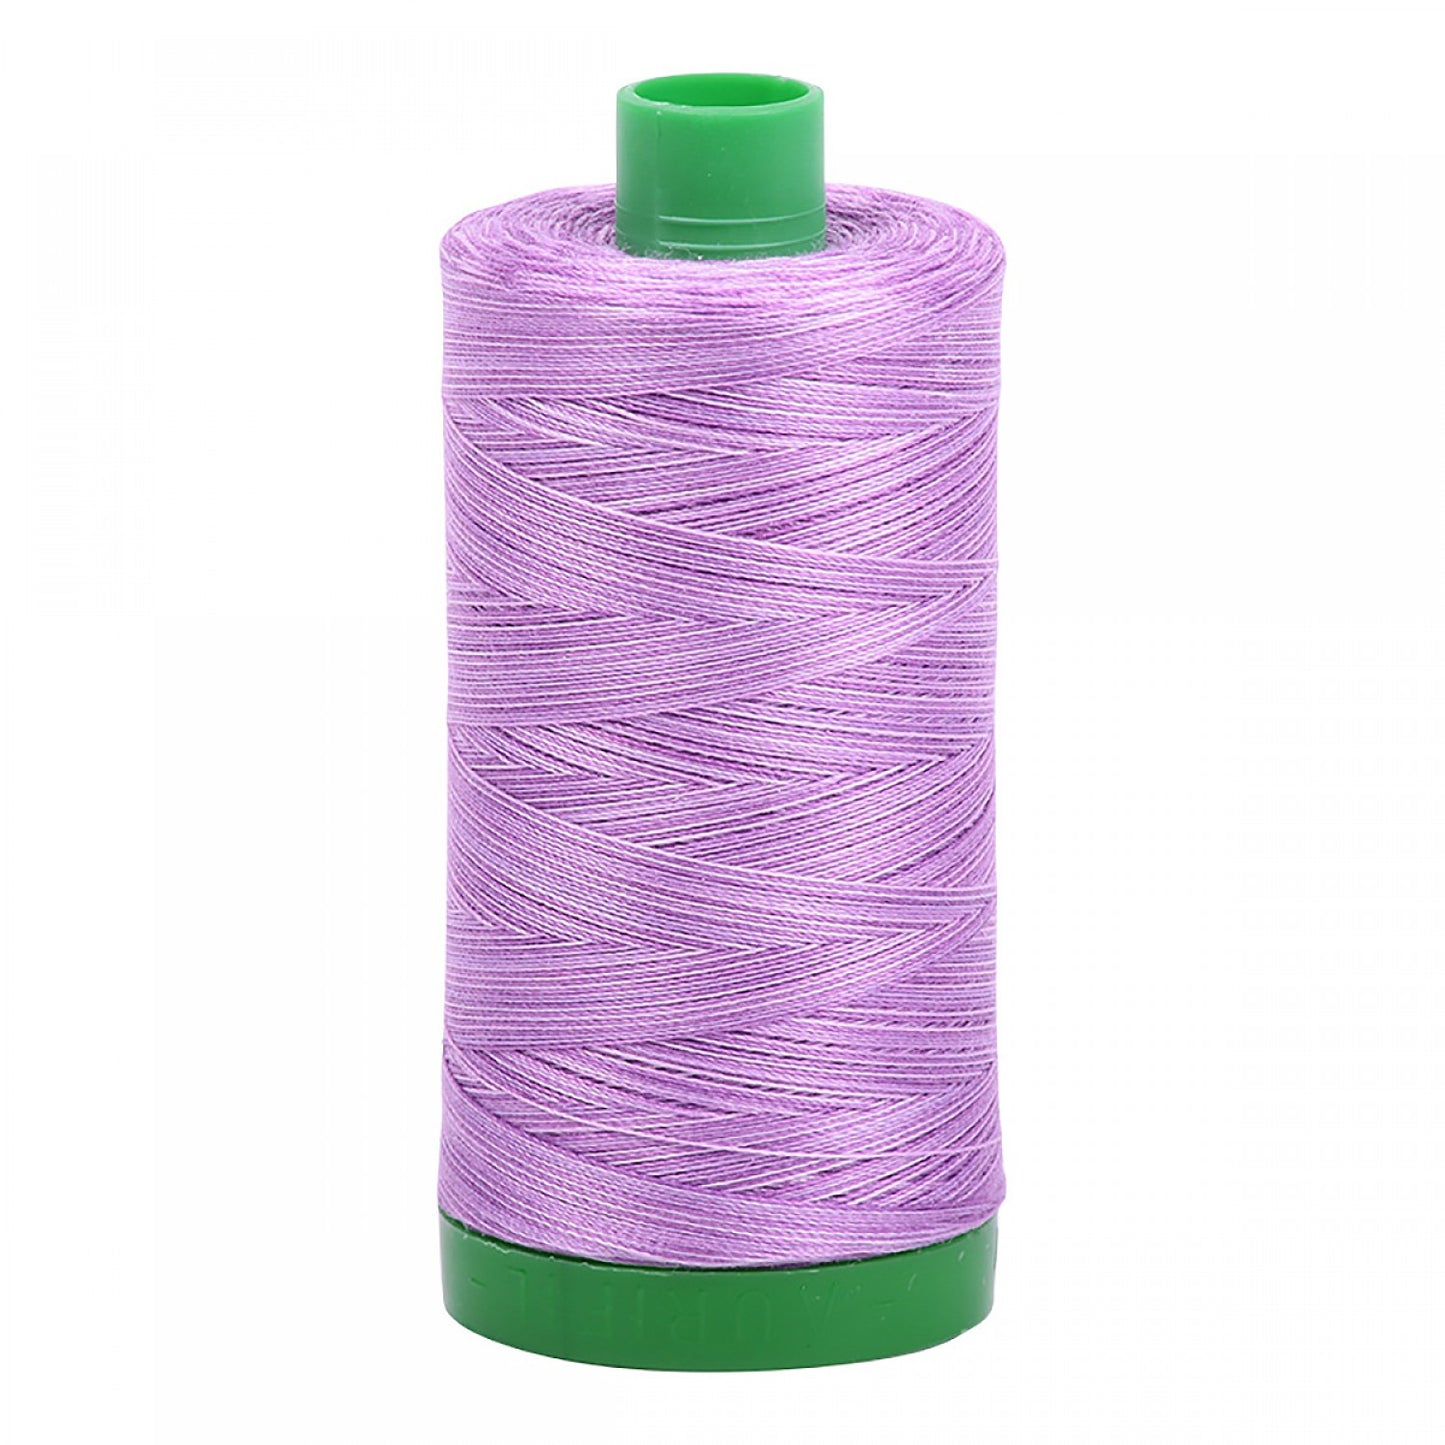 A1140-3840 Mako Cotton Embroidery Thread 40wt 1094yds Variegated Purple